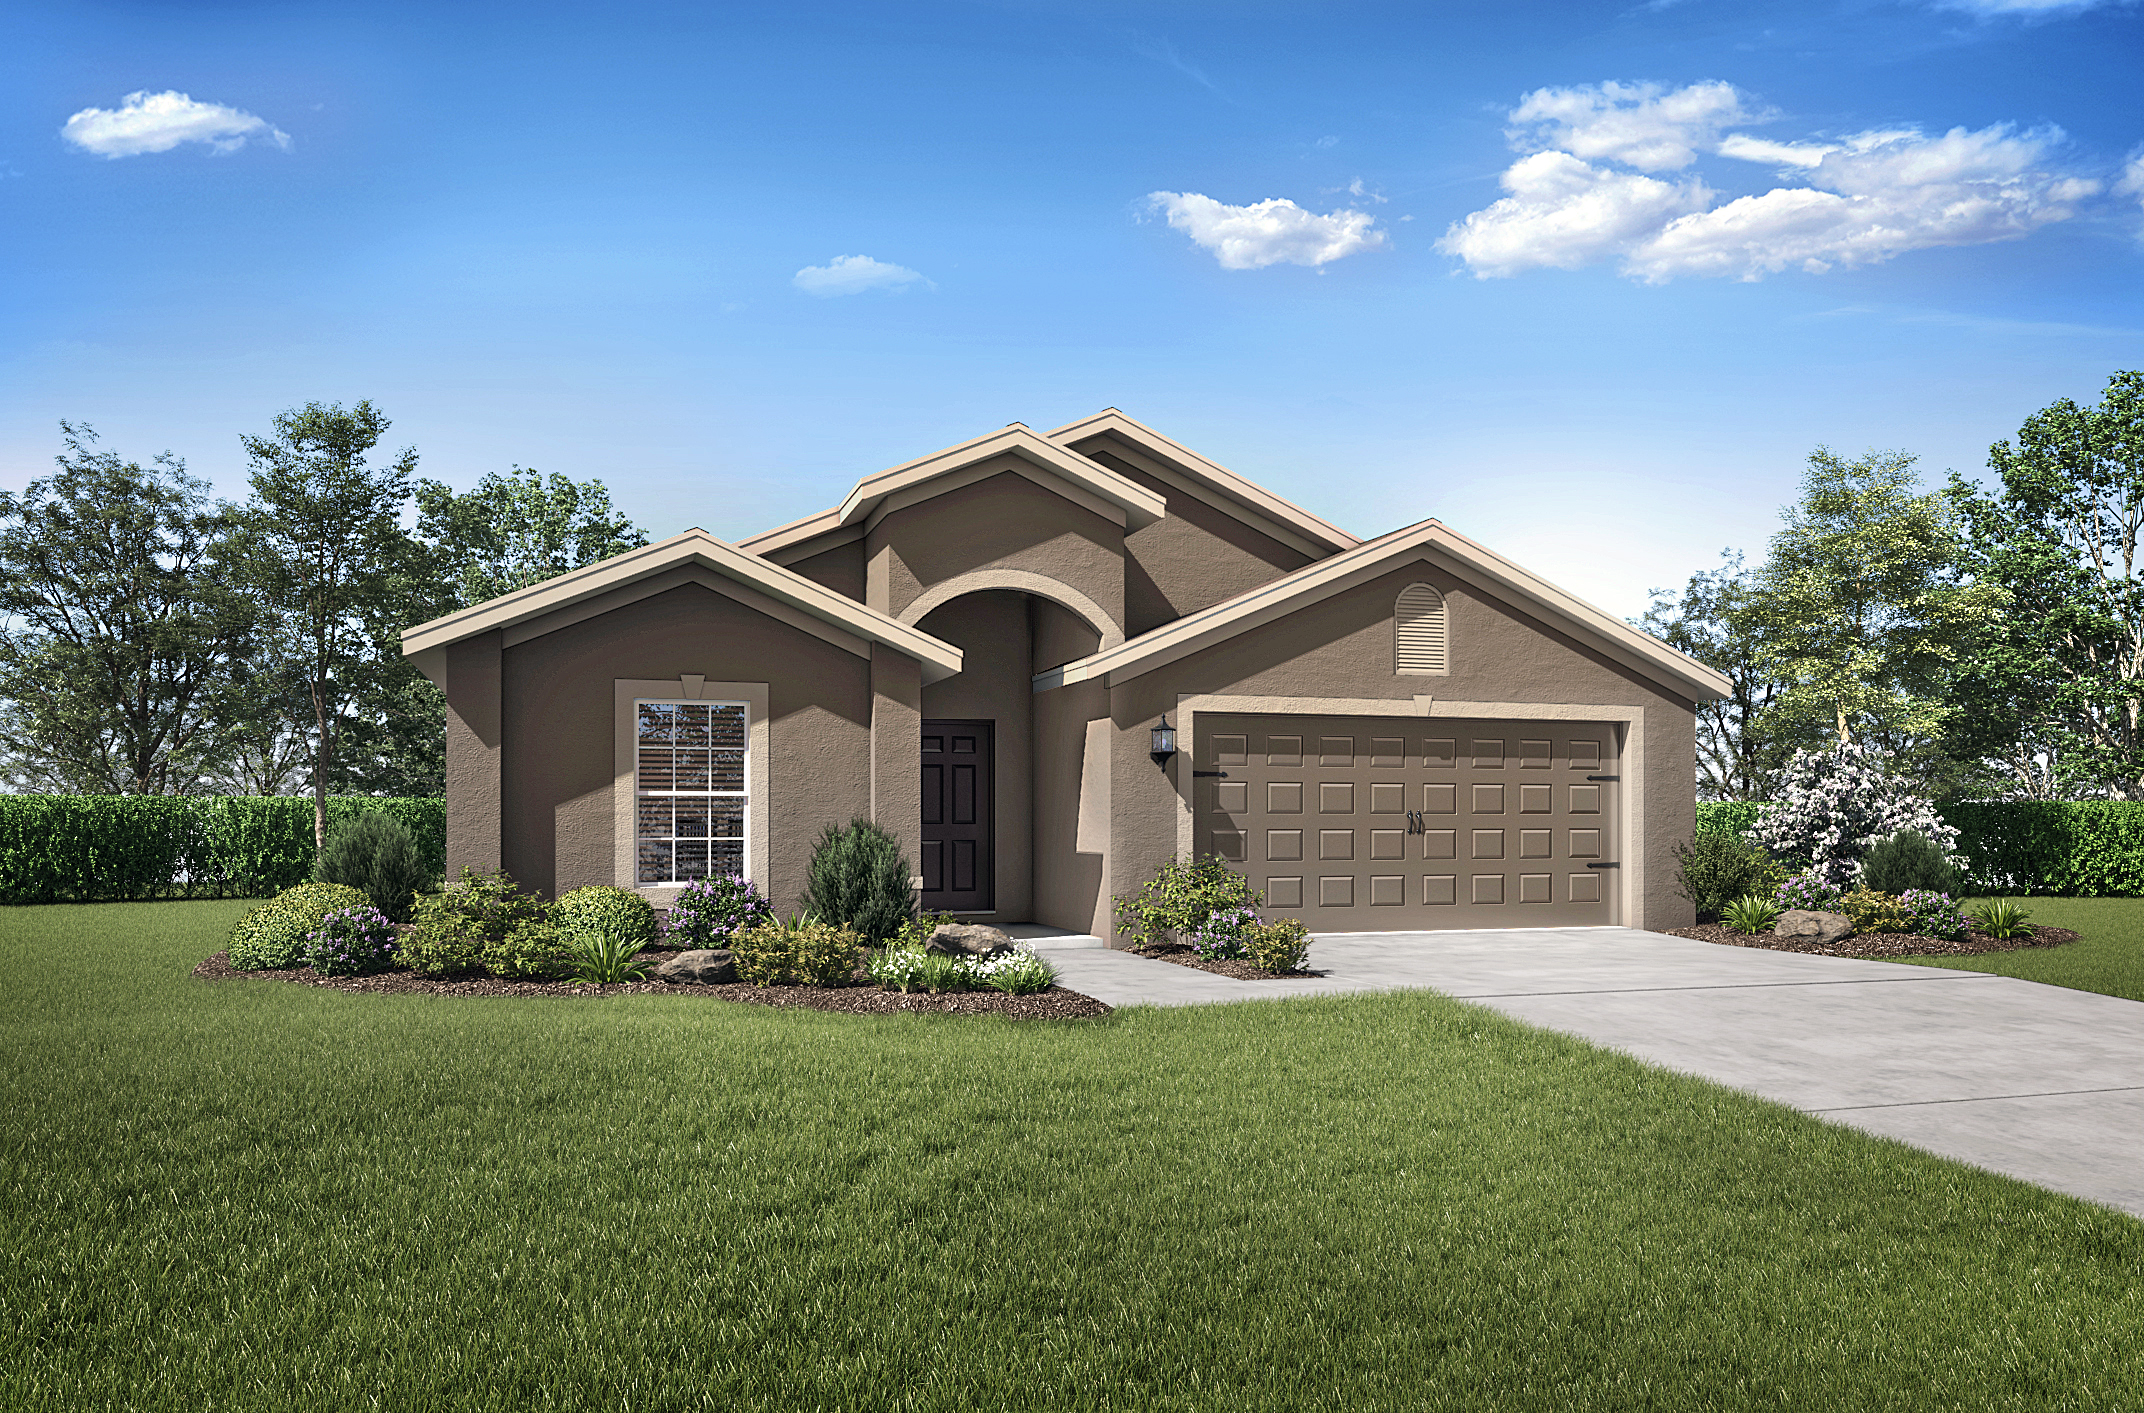 Riverstone by LGI Homes is now open with new spacious, one-story homes for sale ranging from three to five bedrooms. 